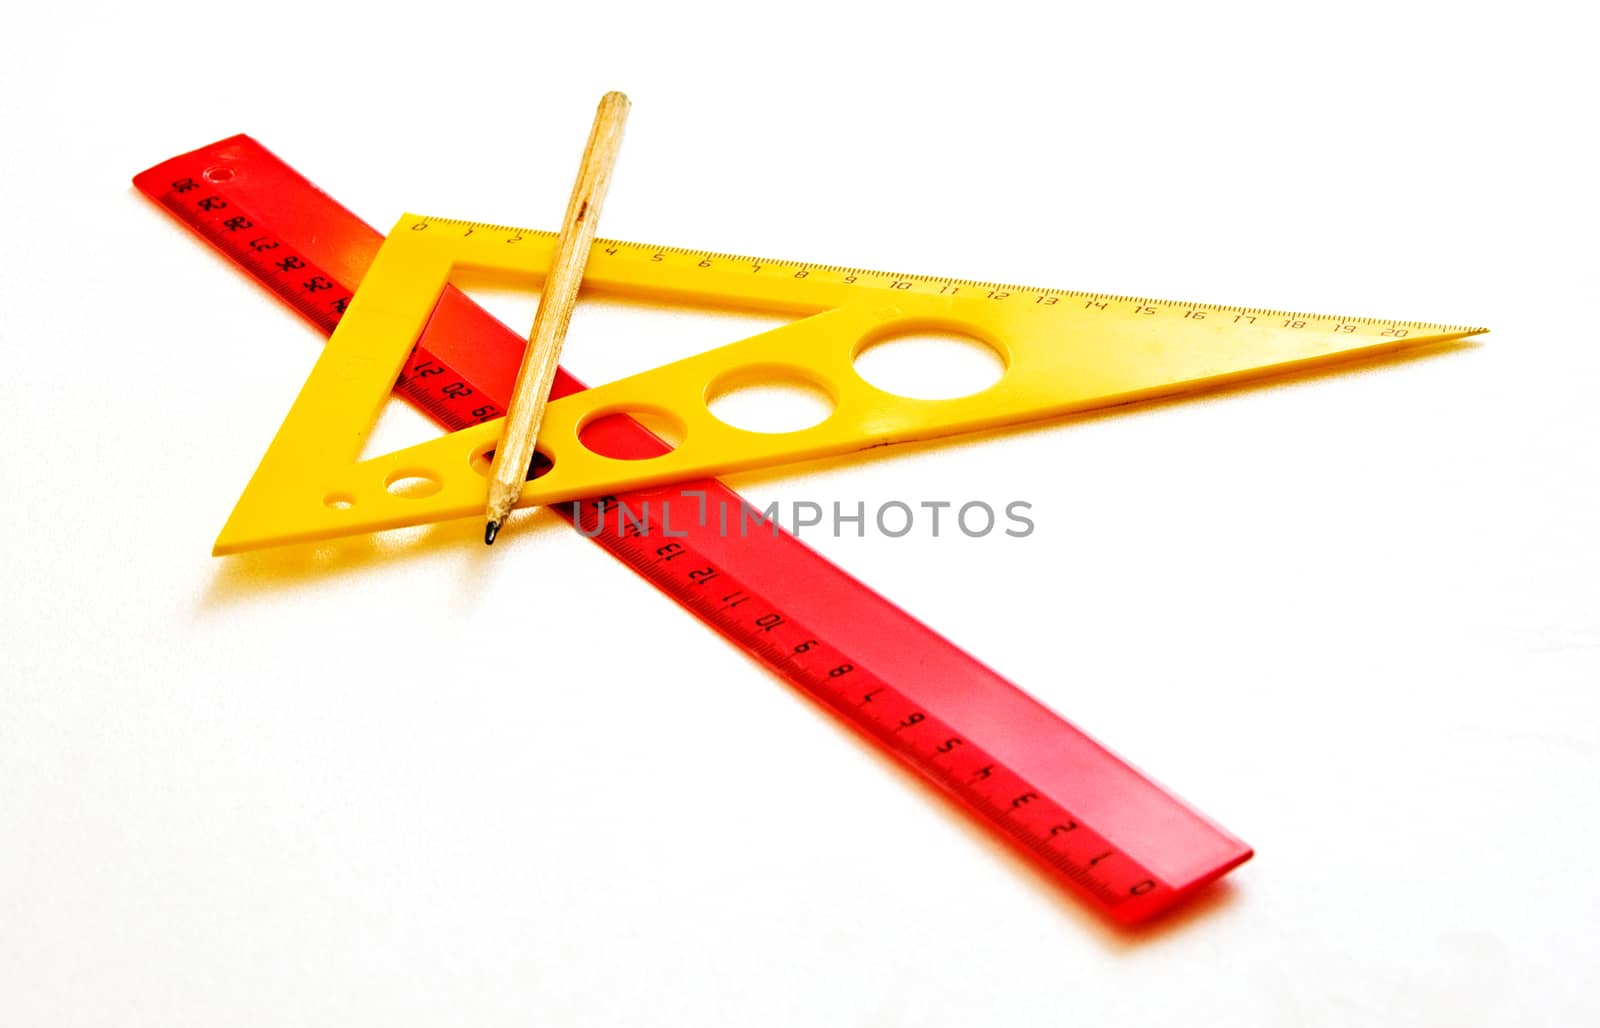 Ruler, pencil triangle on a white background by Grommik